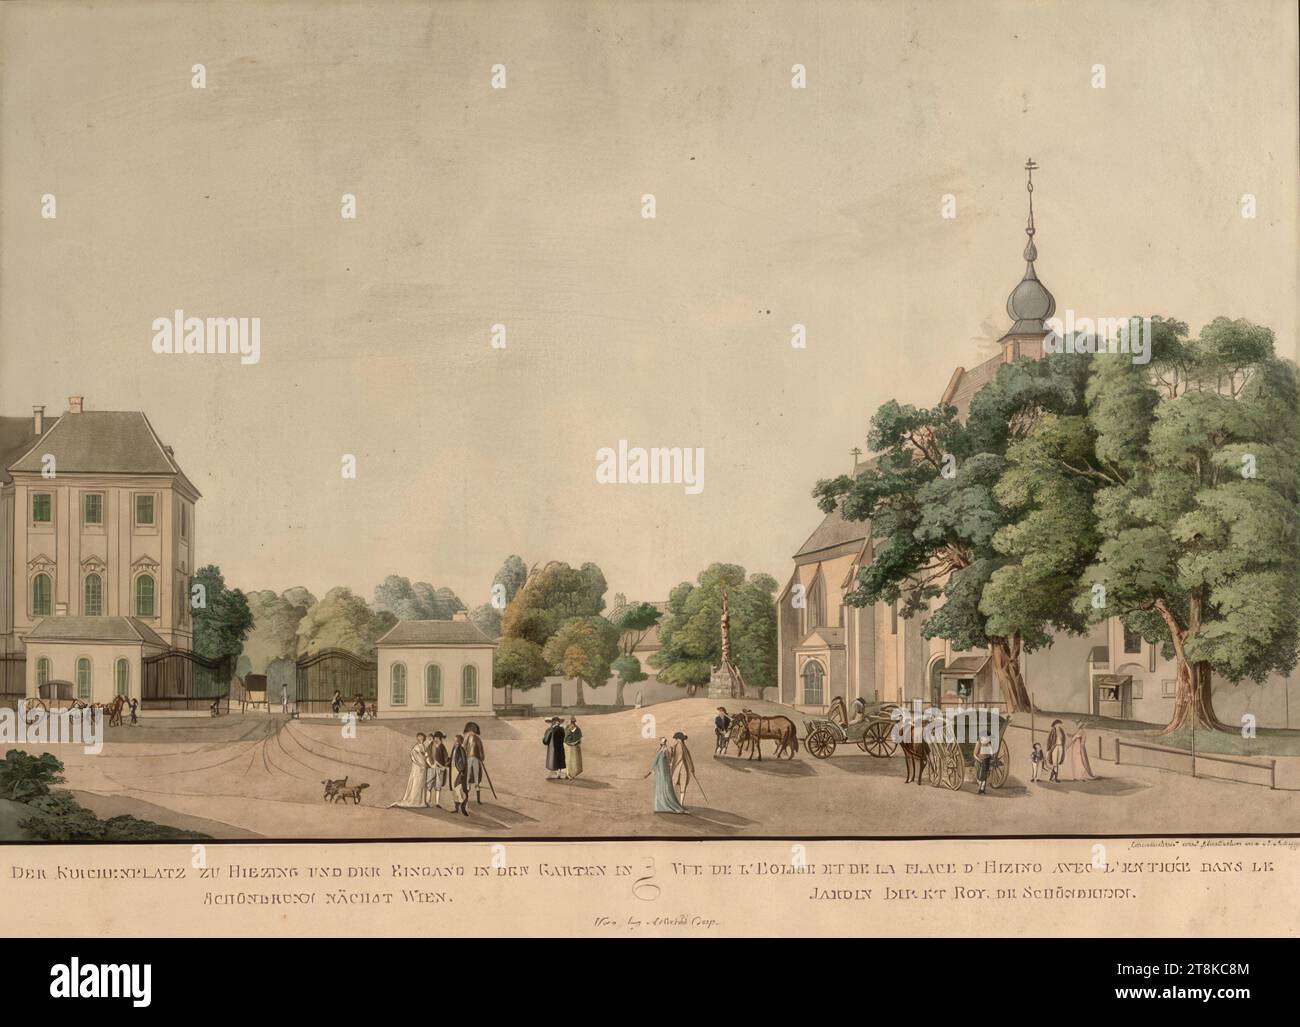 The church square in Hietzing, Collection des Vues, Monuments, Costumes & other objets remarquables de Vienne et de Ses Environs, Johann Kniep, Vienna 1779 - 1809 Vienna, around 1820, print, etching, colored, Austria Stock Photo